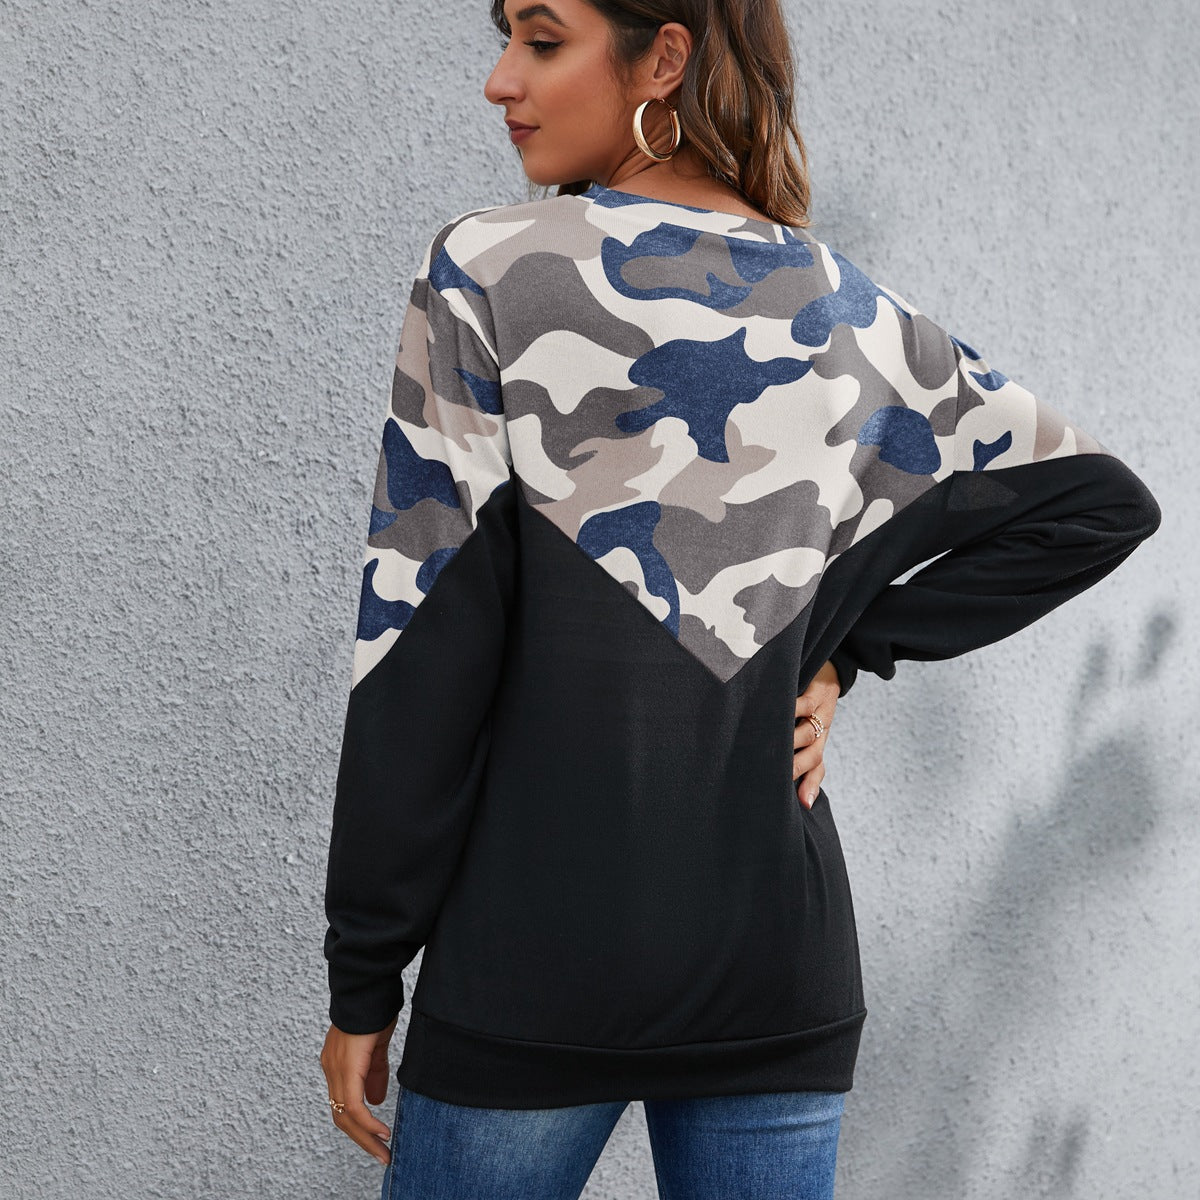 Autumn Winter Camouflage Printed Casual Top Plush round Neck Long Sleeve Sweater